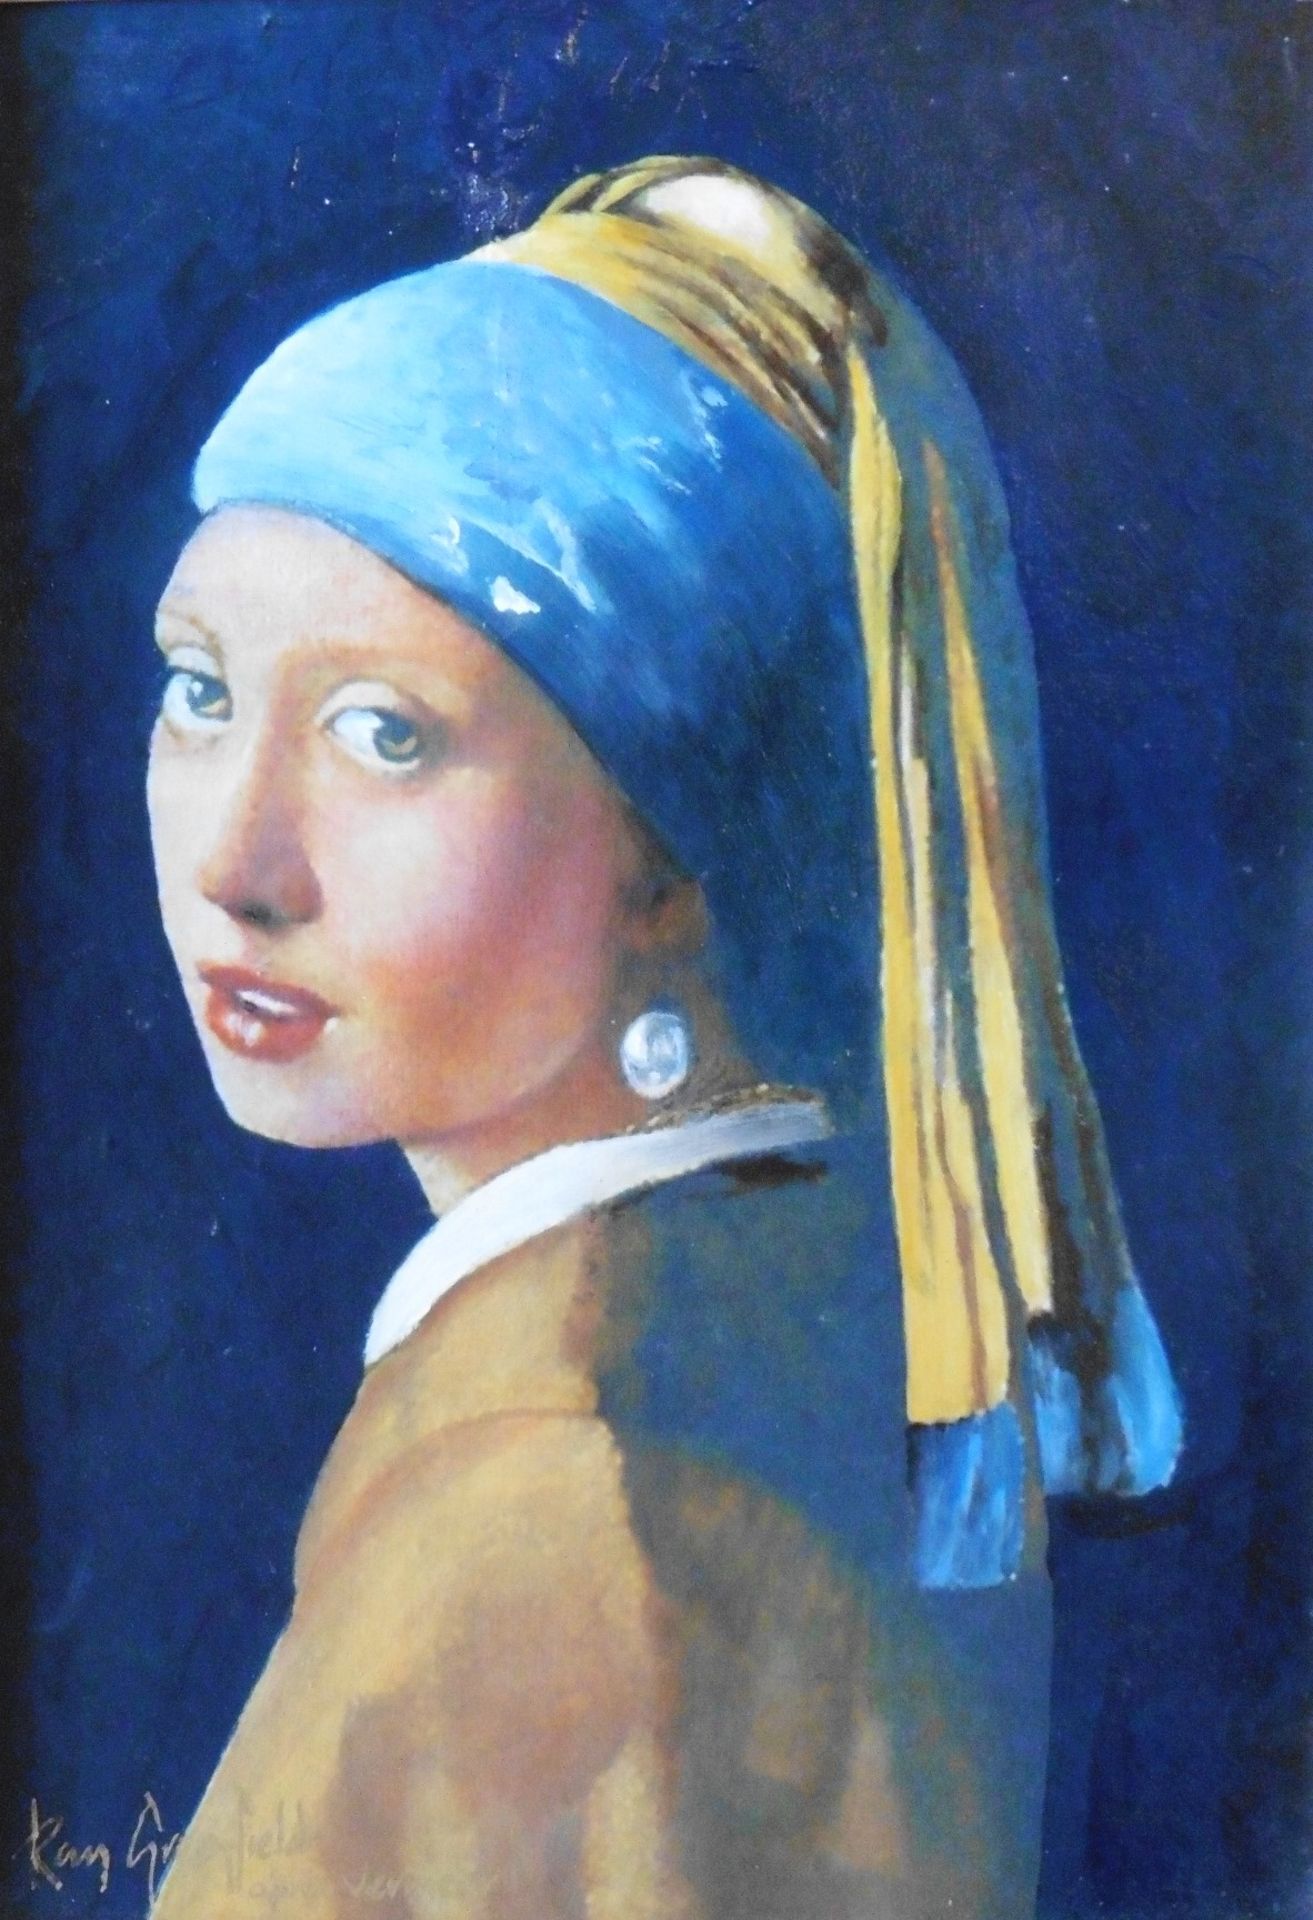 Ray Greenfield Oil painting “Girl with pearl earring” after Johannes Vermeer